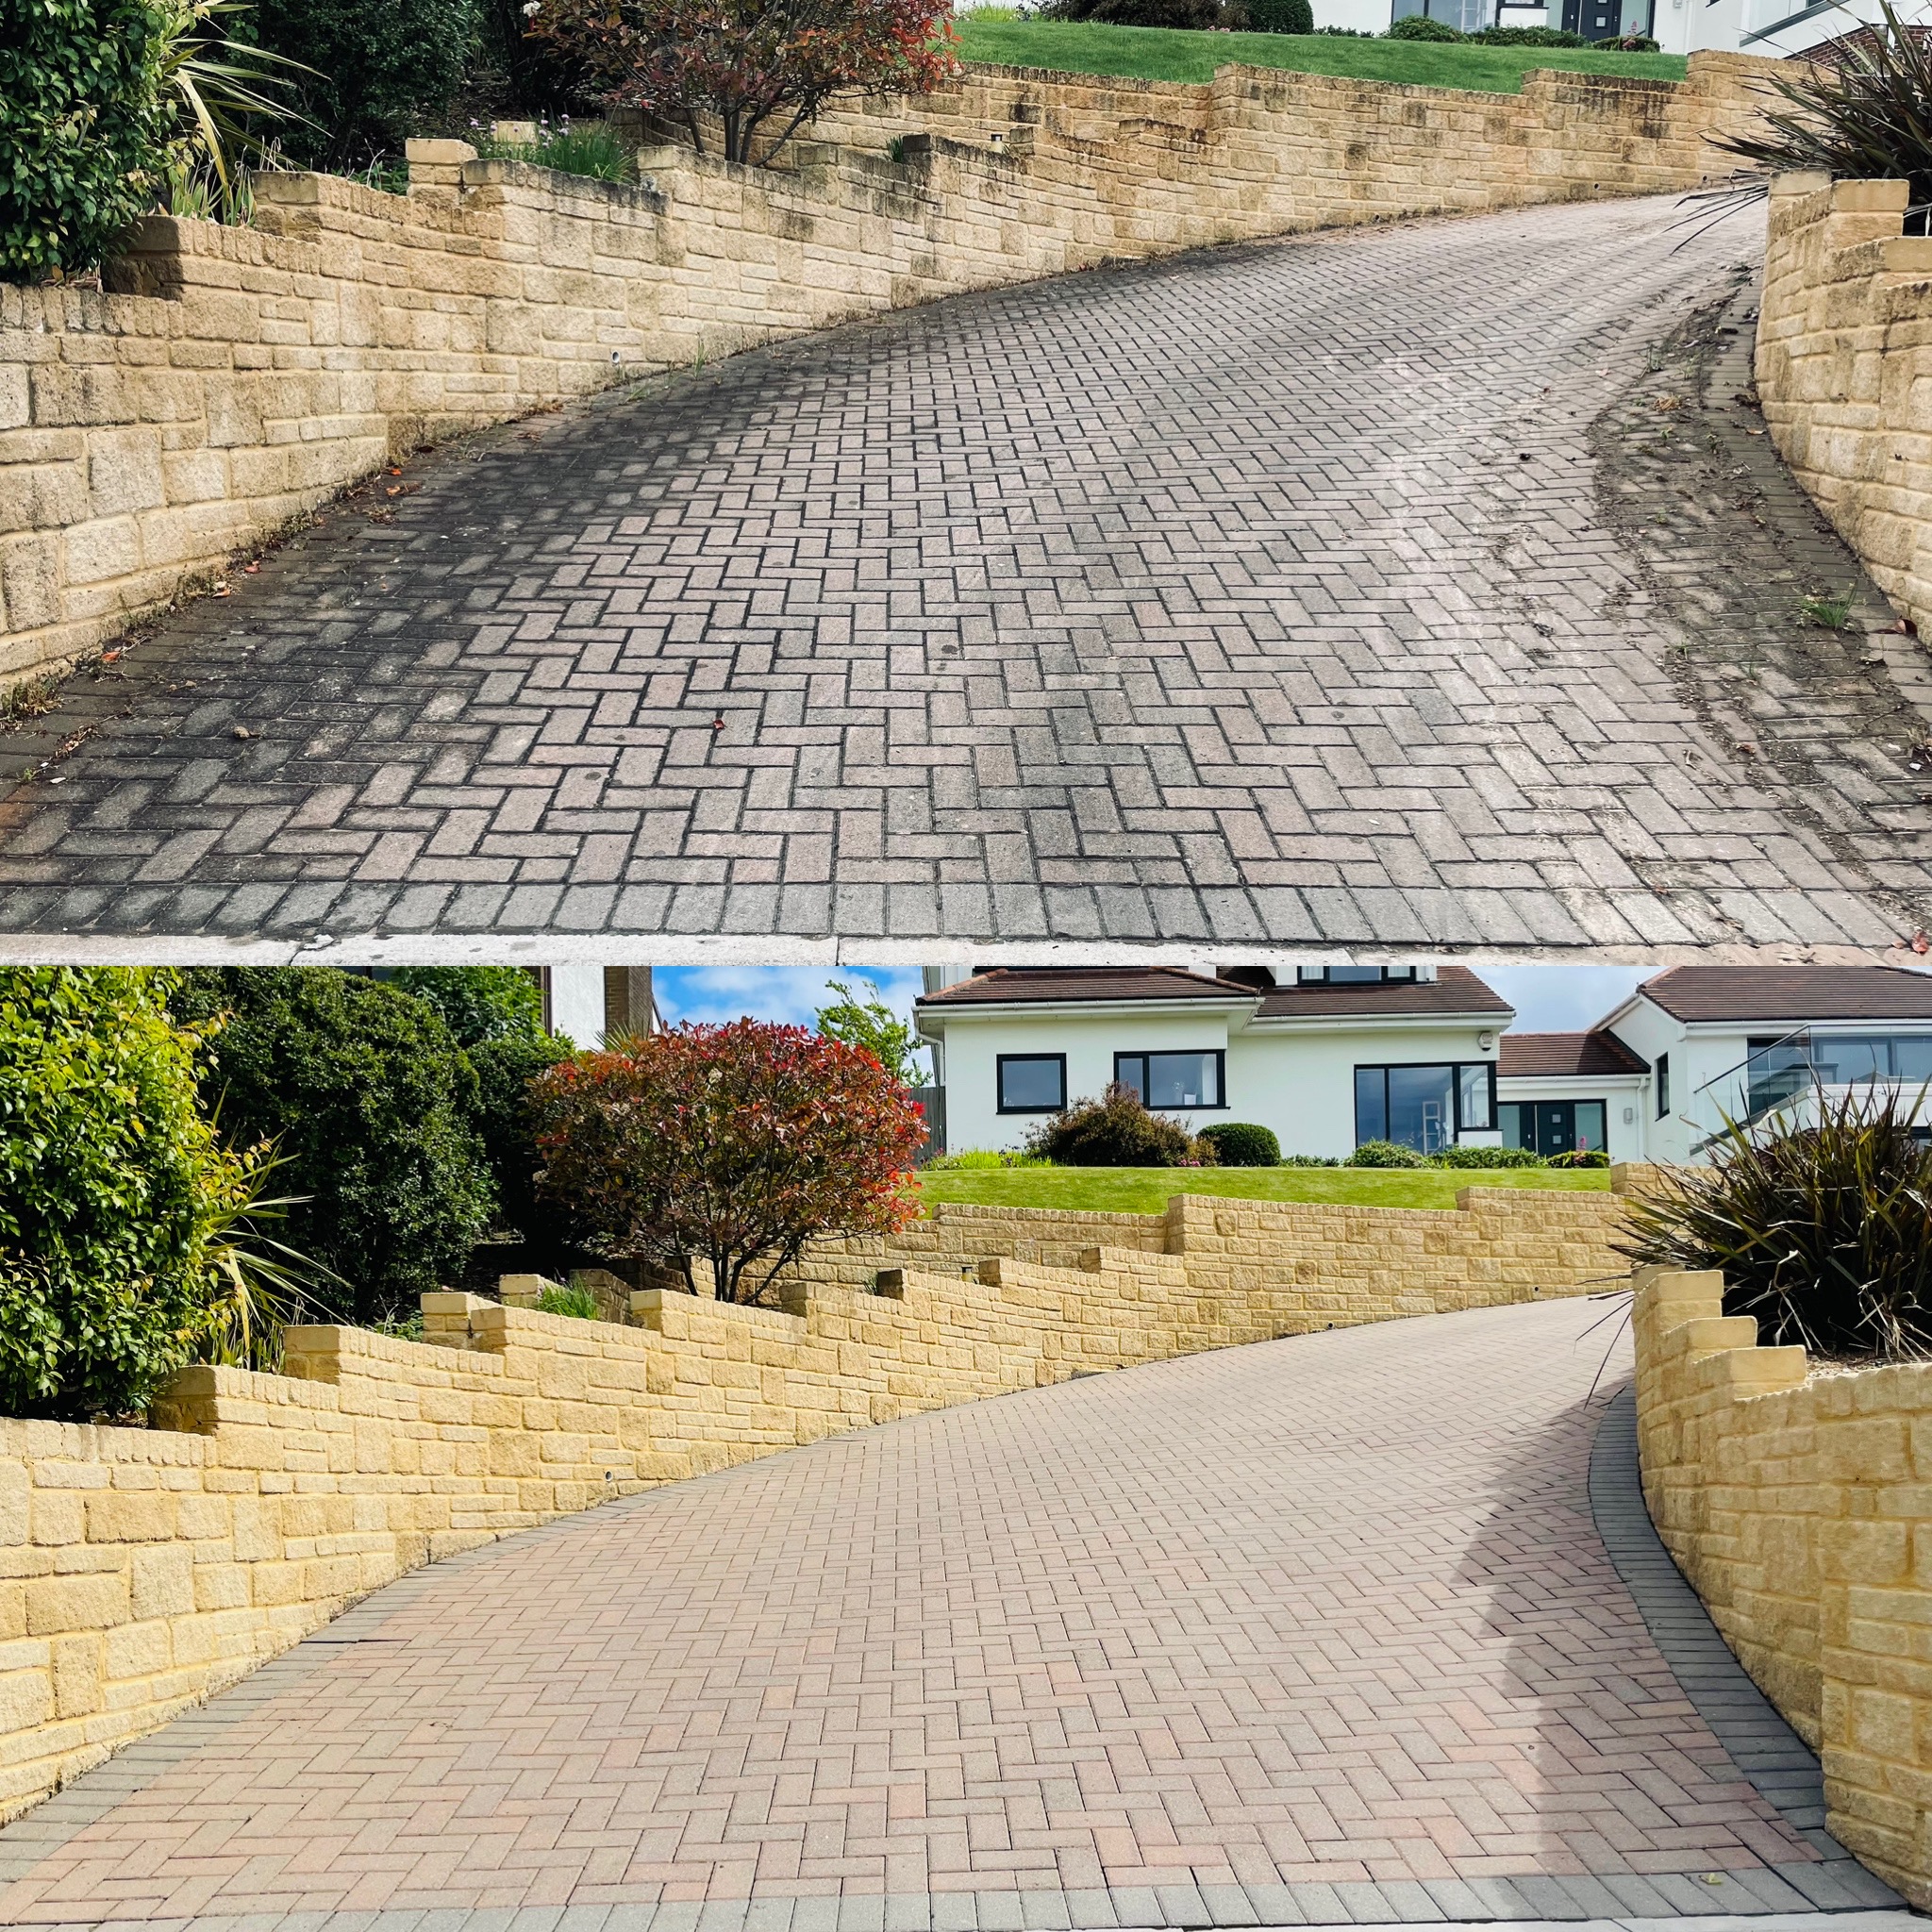 9 Reasons to Hire Professionals for Driveway Cleaning